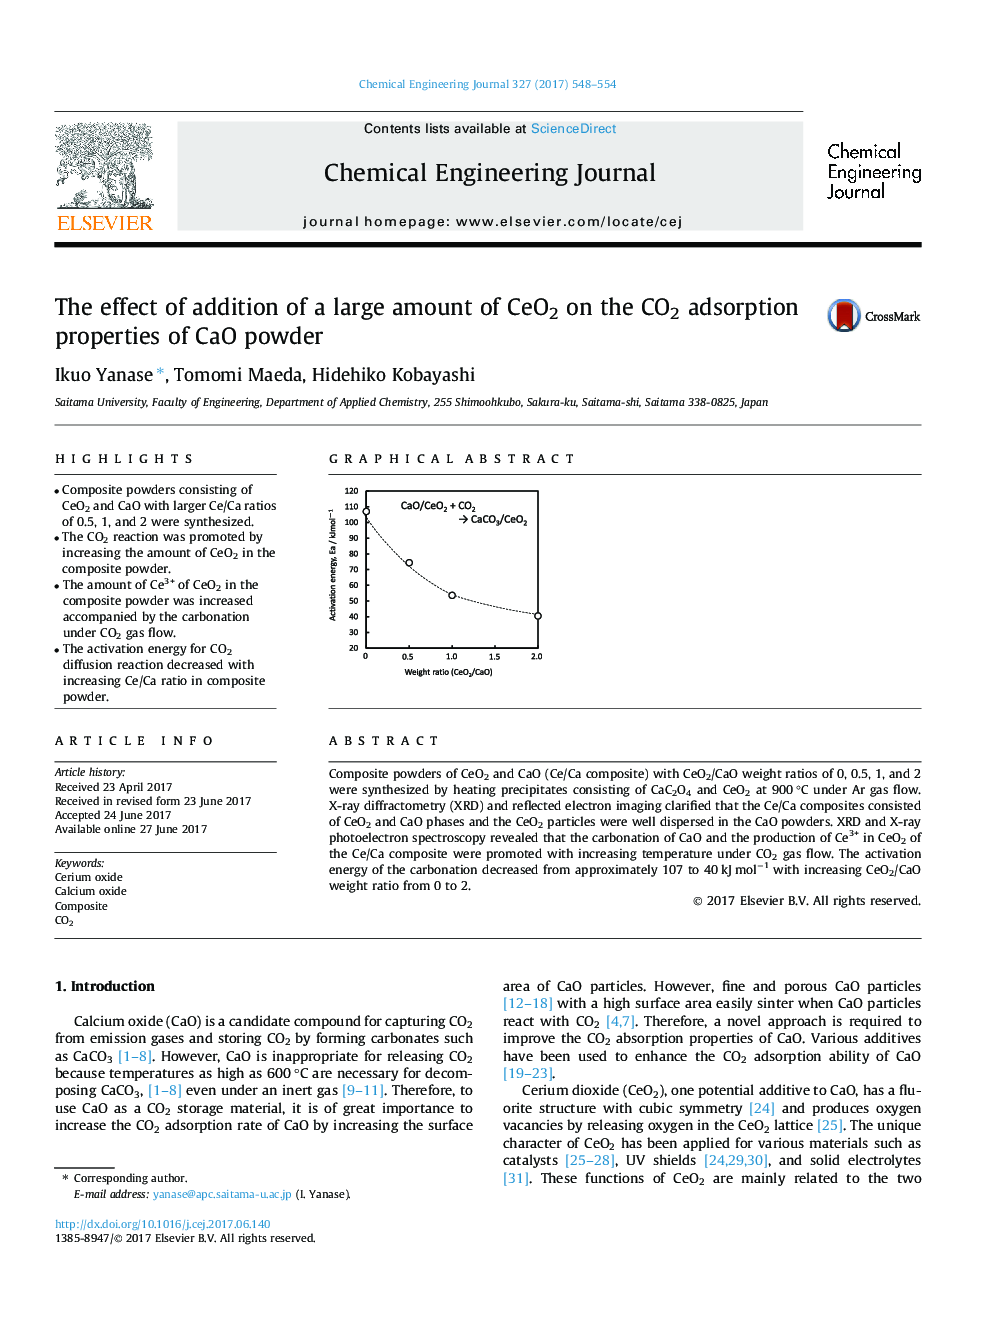 The effect of addition of a large amount of CeO2 on the CO2 adsorption properties of CaO powder